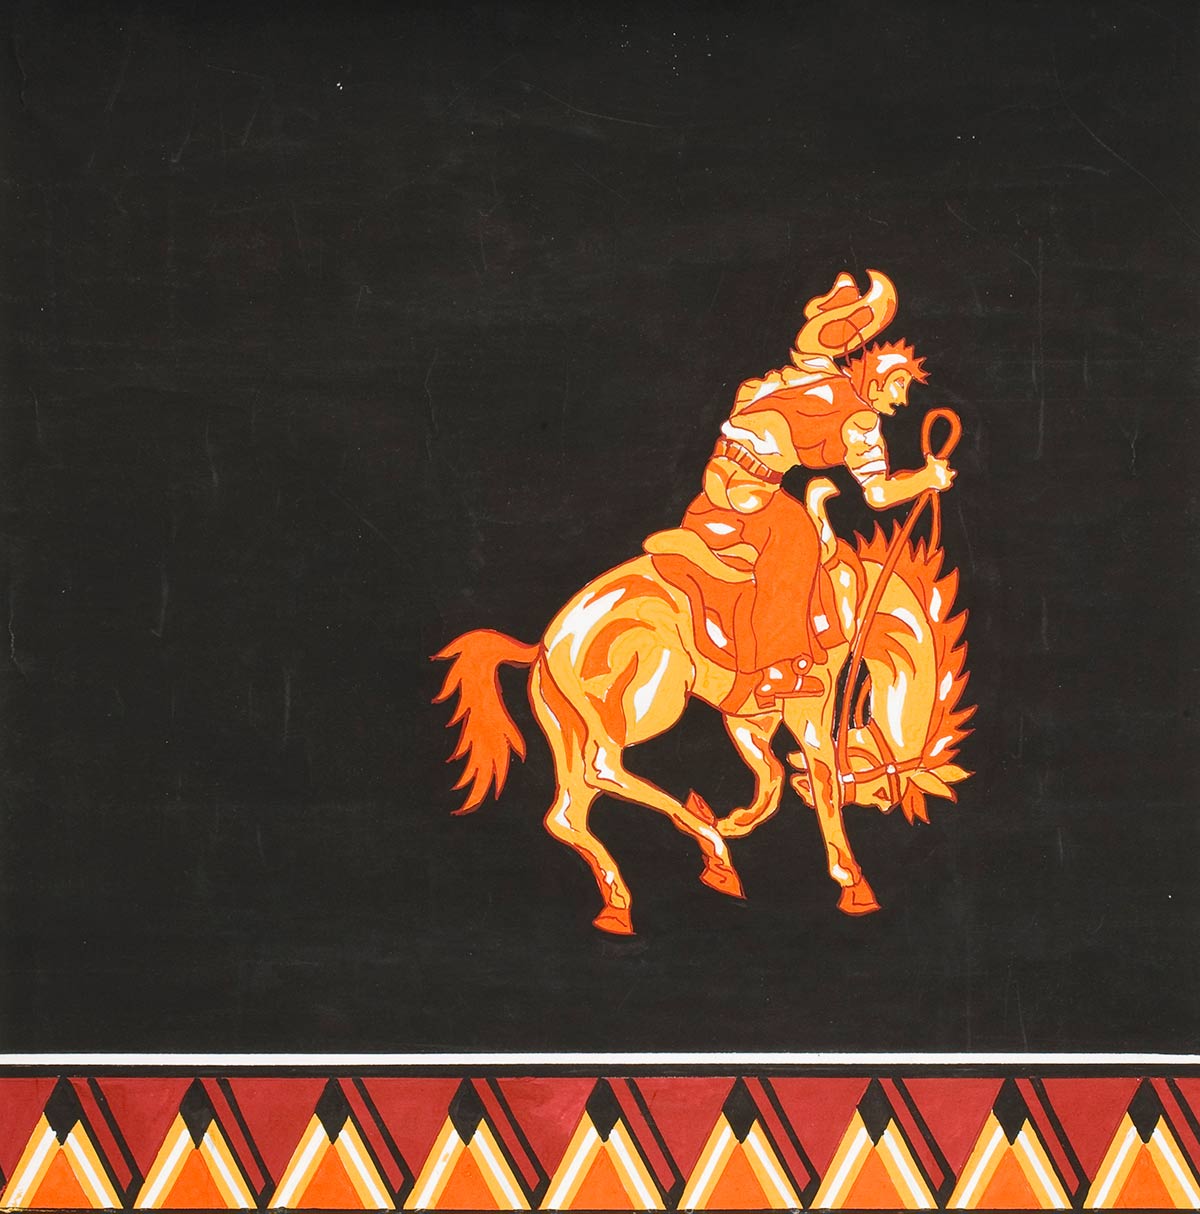 A painted artwork on paper depicting a cowboy on a bucking horse.The image is painted in white, yellow, orange and red on a black background. The bottom edge is bordered with a geometric triangle design. - click to view larger image